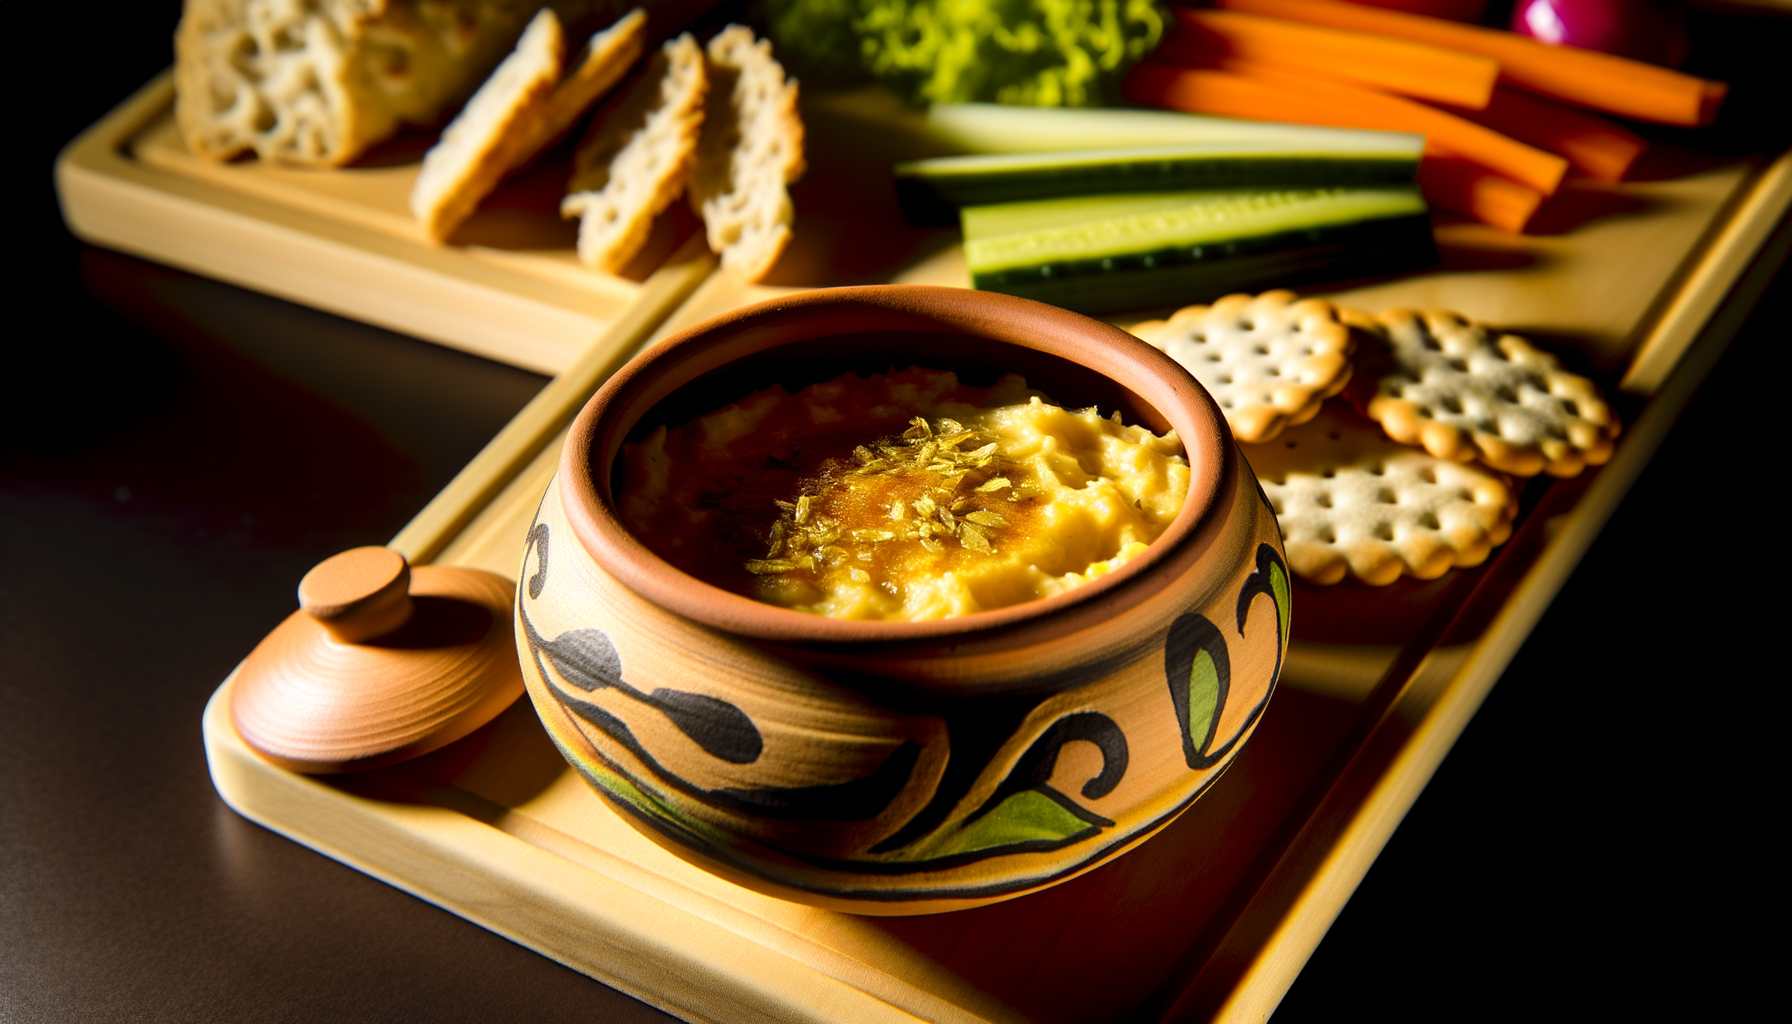 Elegant earthenware bowl filled with golden, creamy cheese dip, surrounded by bread, crackers, and veggies, on a wooden tray.